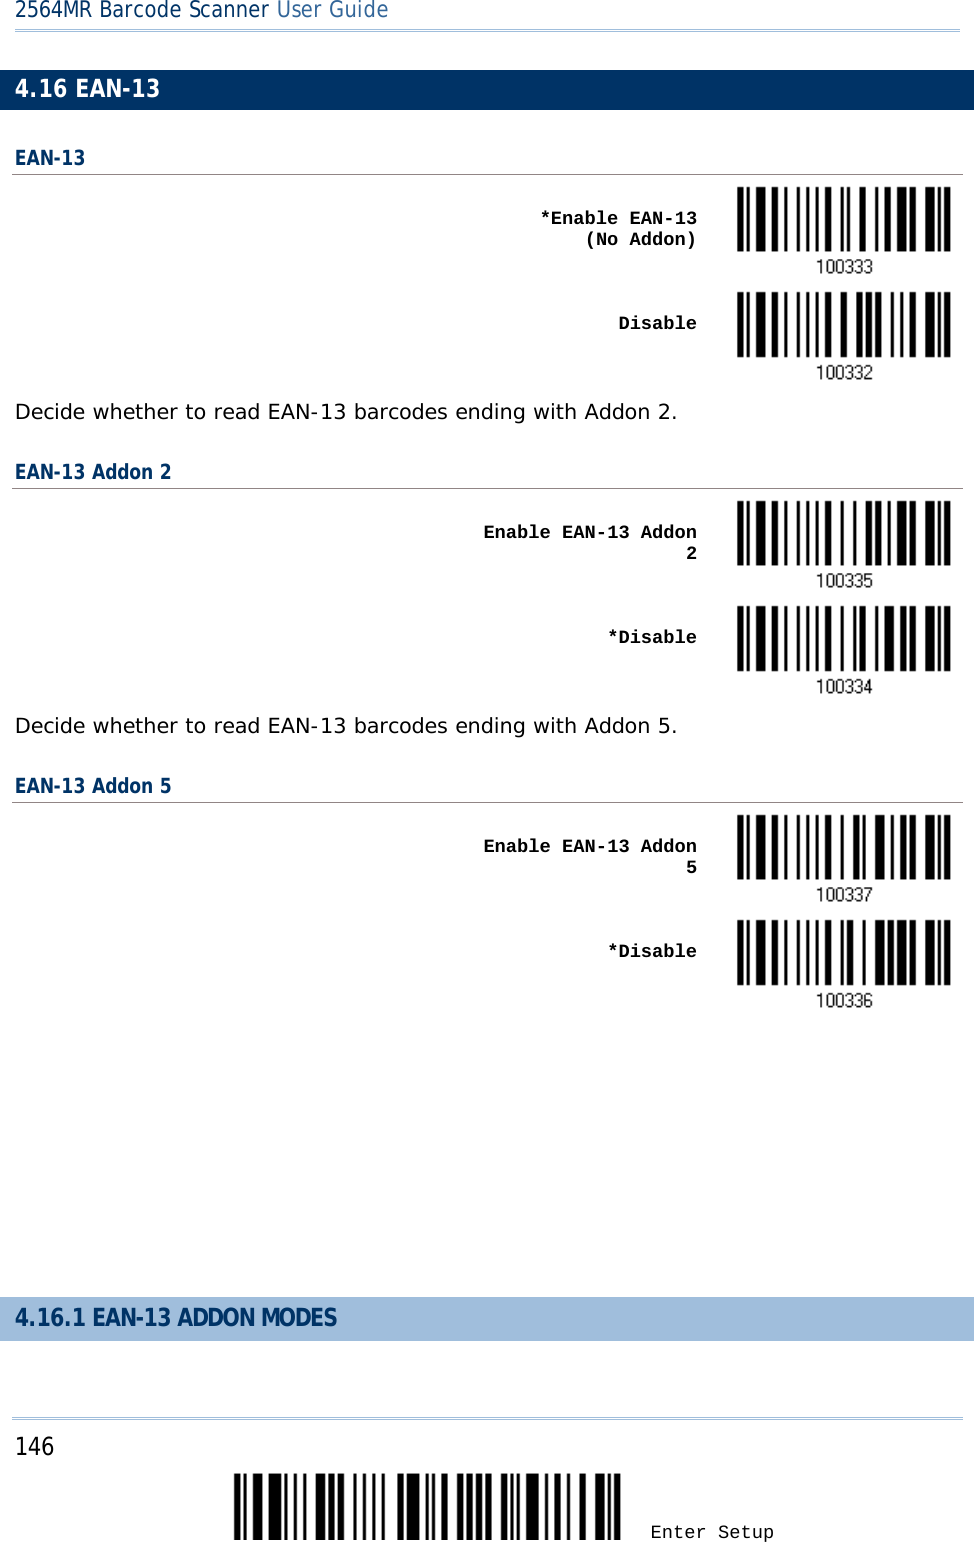 2564MR Barcode Scanner User Guide  4.16 EAN-13 EAN-13    *Enable EAN-13    (No Addon)     Disable  Decide whether to read EAN-13 barcodes ending with Addon 2.  EAN-13 Addon 2    Enable EAN-13 Addon 2     *Disable  Decide whether to read EAN-13 barcodes ending with Addon 5. EAN-13 Addon 5    Enable EAN-13 Addon 5     *Disable         4.16.1 EAN-13 ADDON MODES 146 Enter Setup 